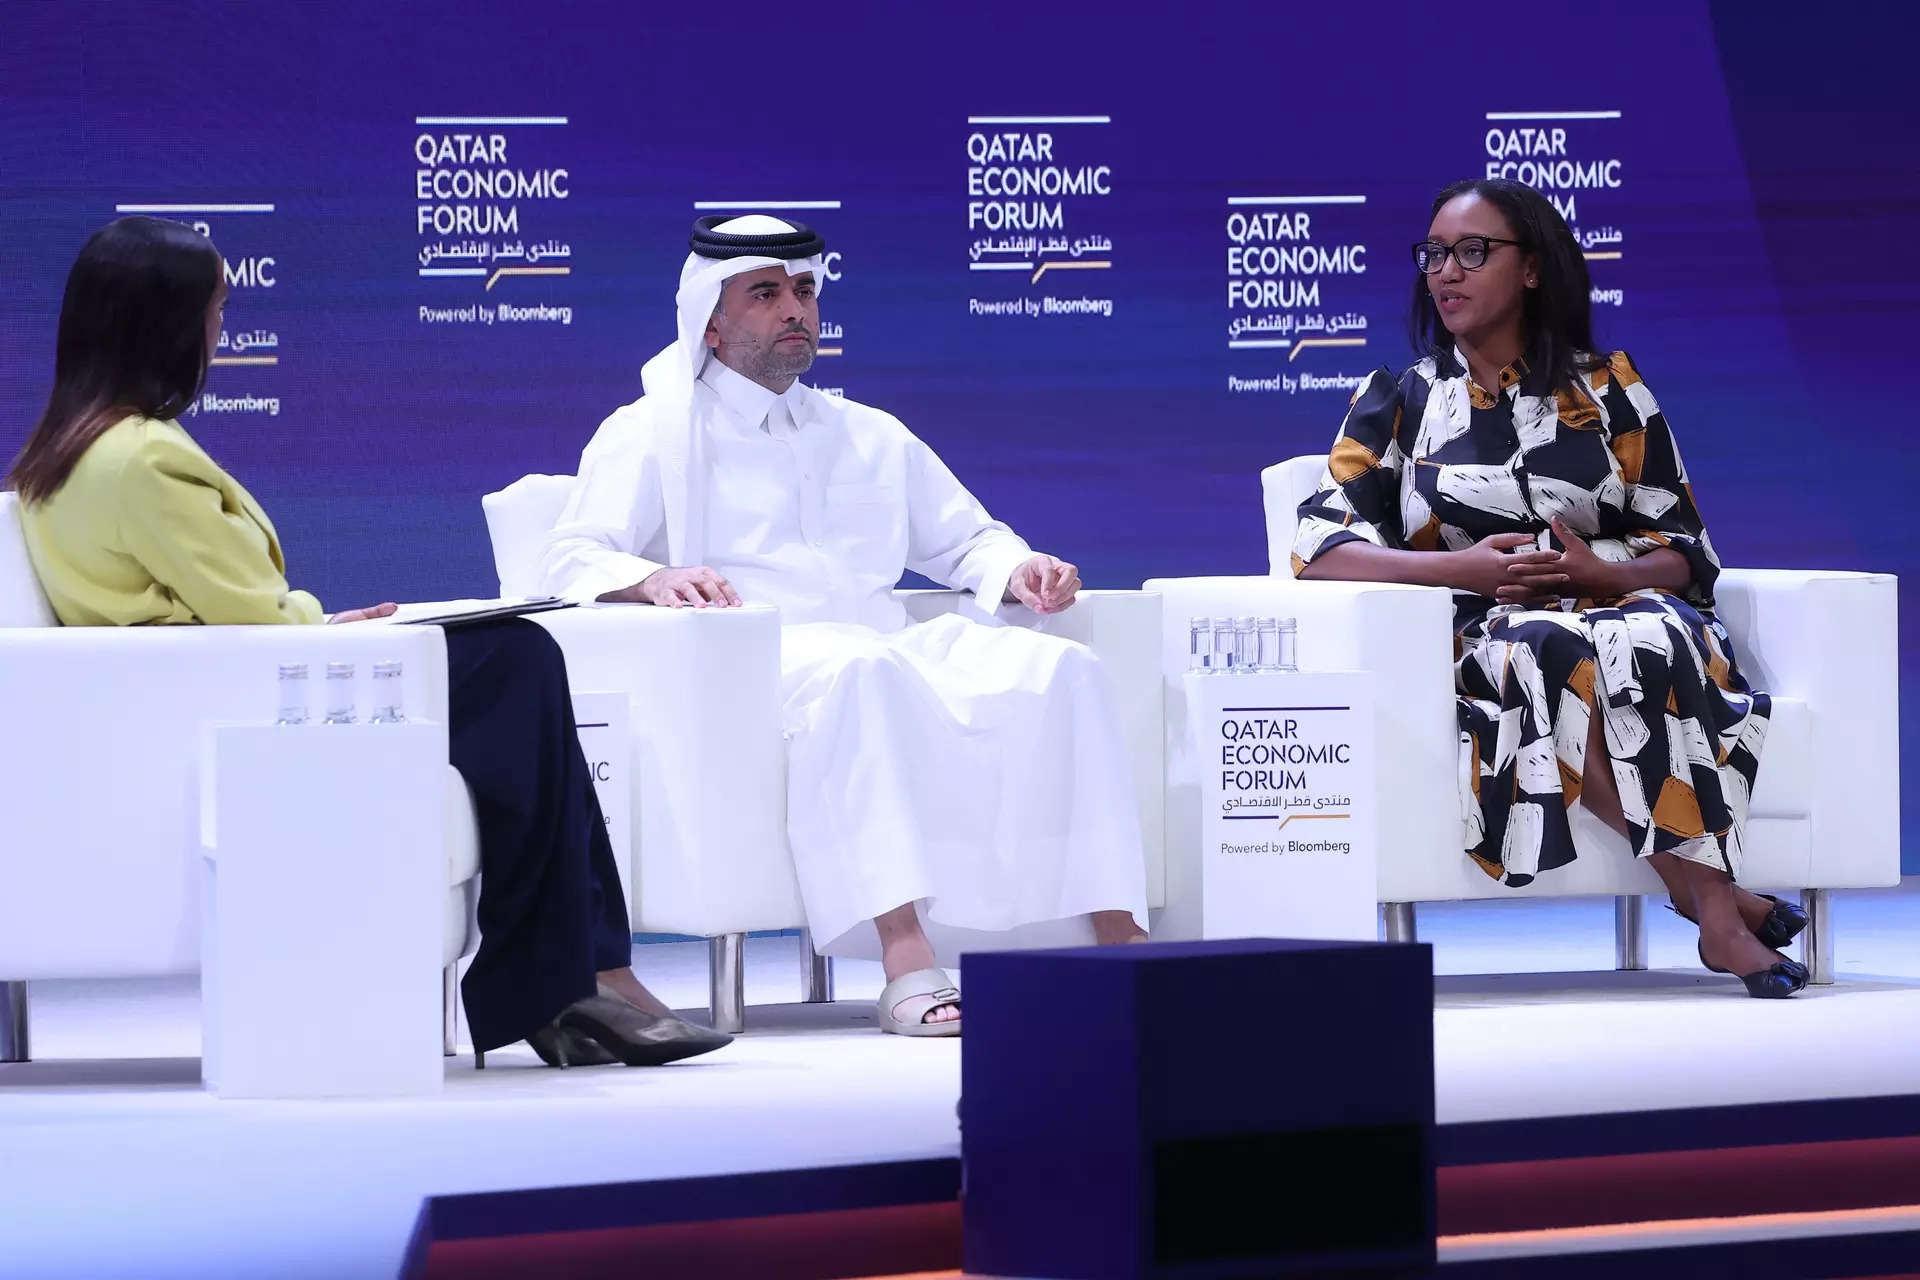 </p>
<p>Qatar Airways CEO Badr Mohammed al-Meer (C) and RwandAir CEO Yvonne Makolo (R) participate in a discussion at the Qatar Economic Forum in Doha on May 15, 2024.</p>
<p>